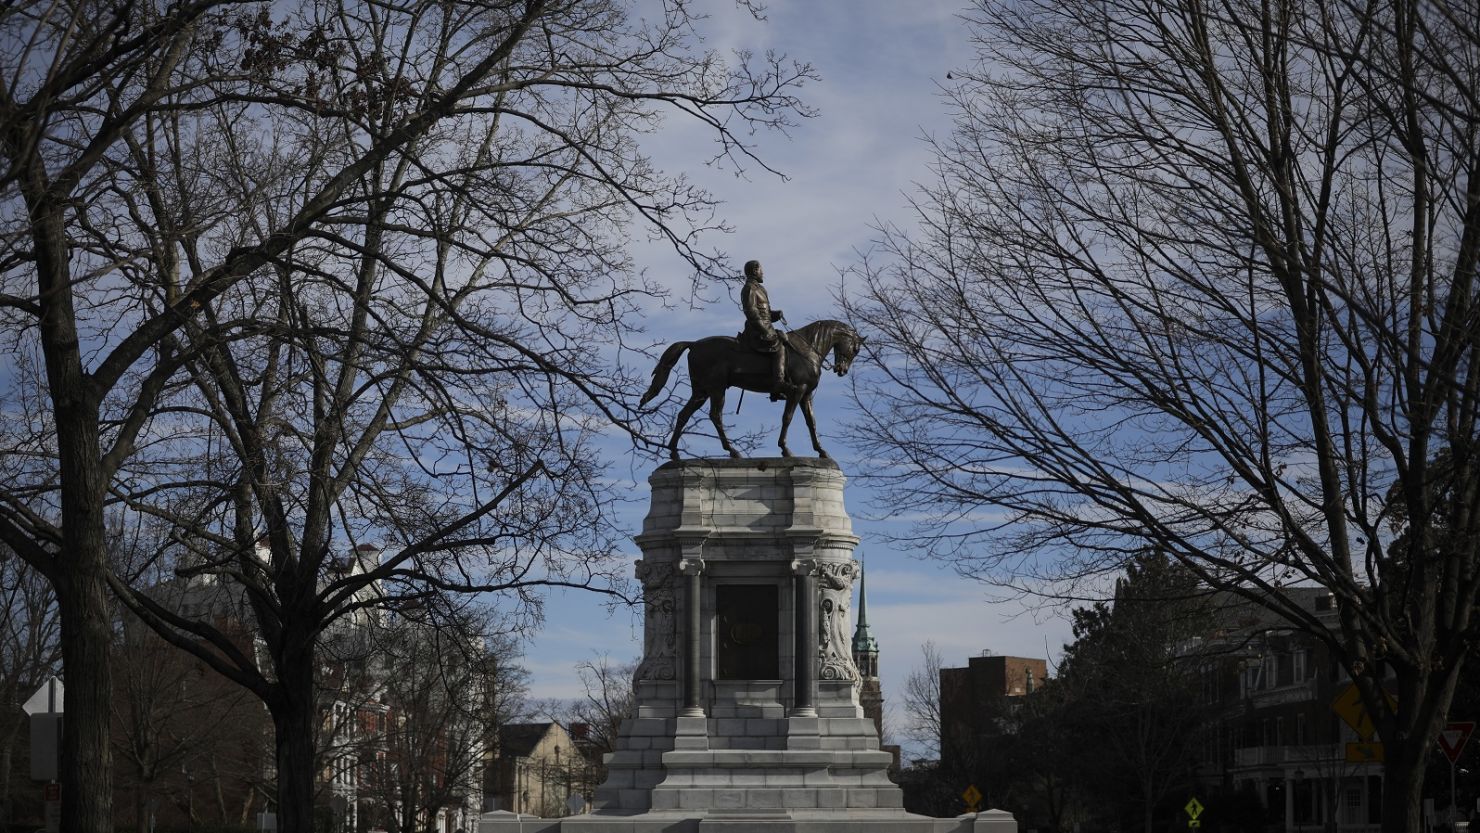 The Robert E. Lee Monument stands on Monument Avenue, February 8, 2019 in Richmond, Virginia.